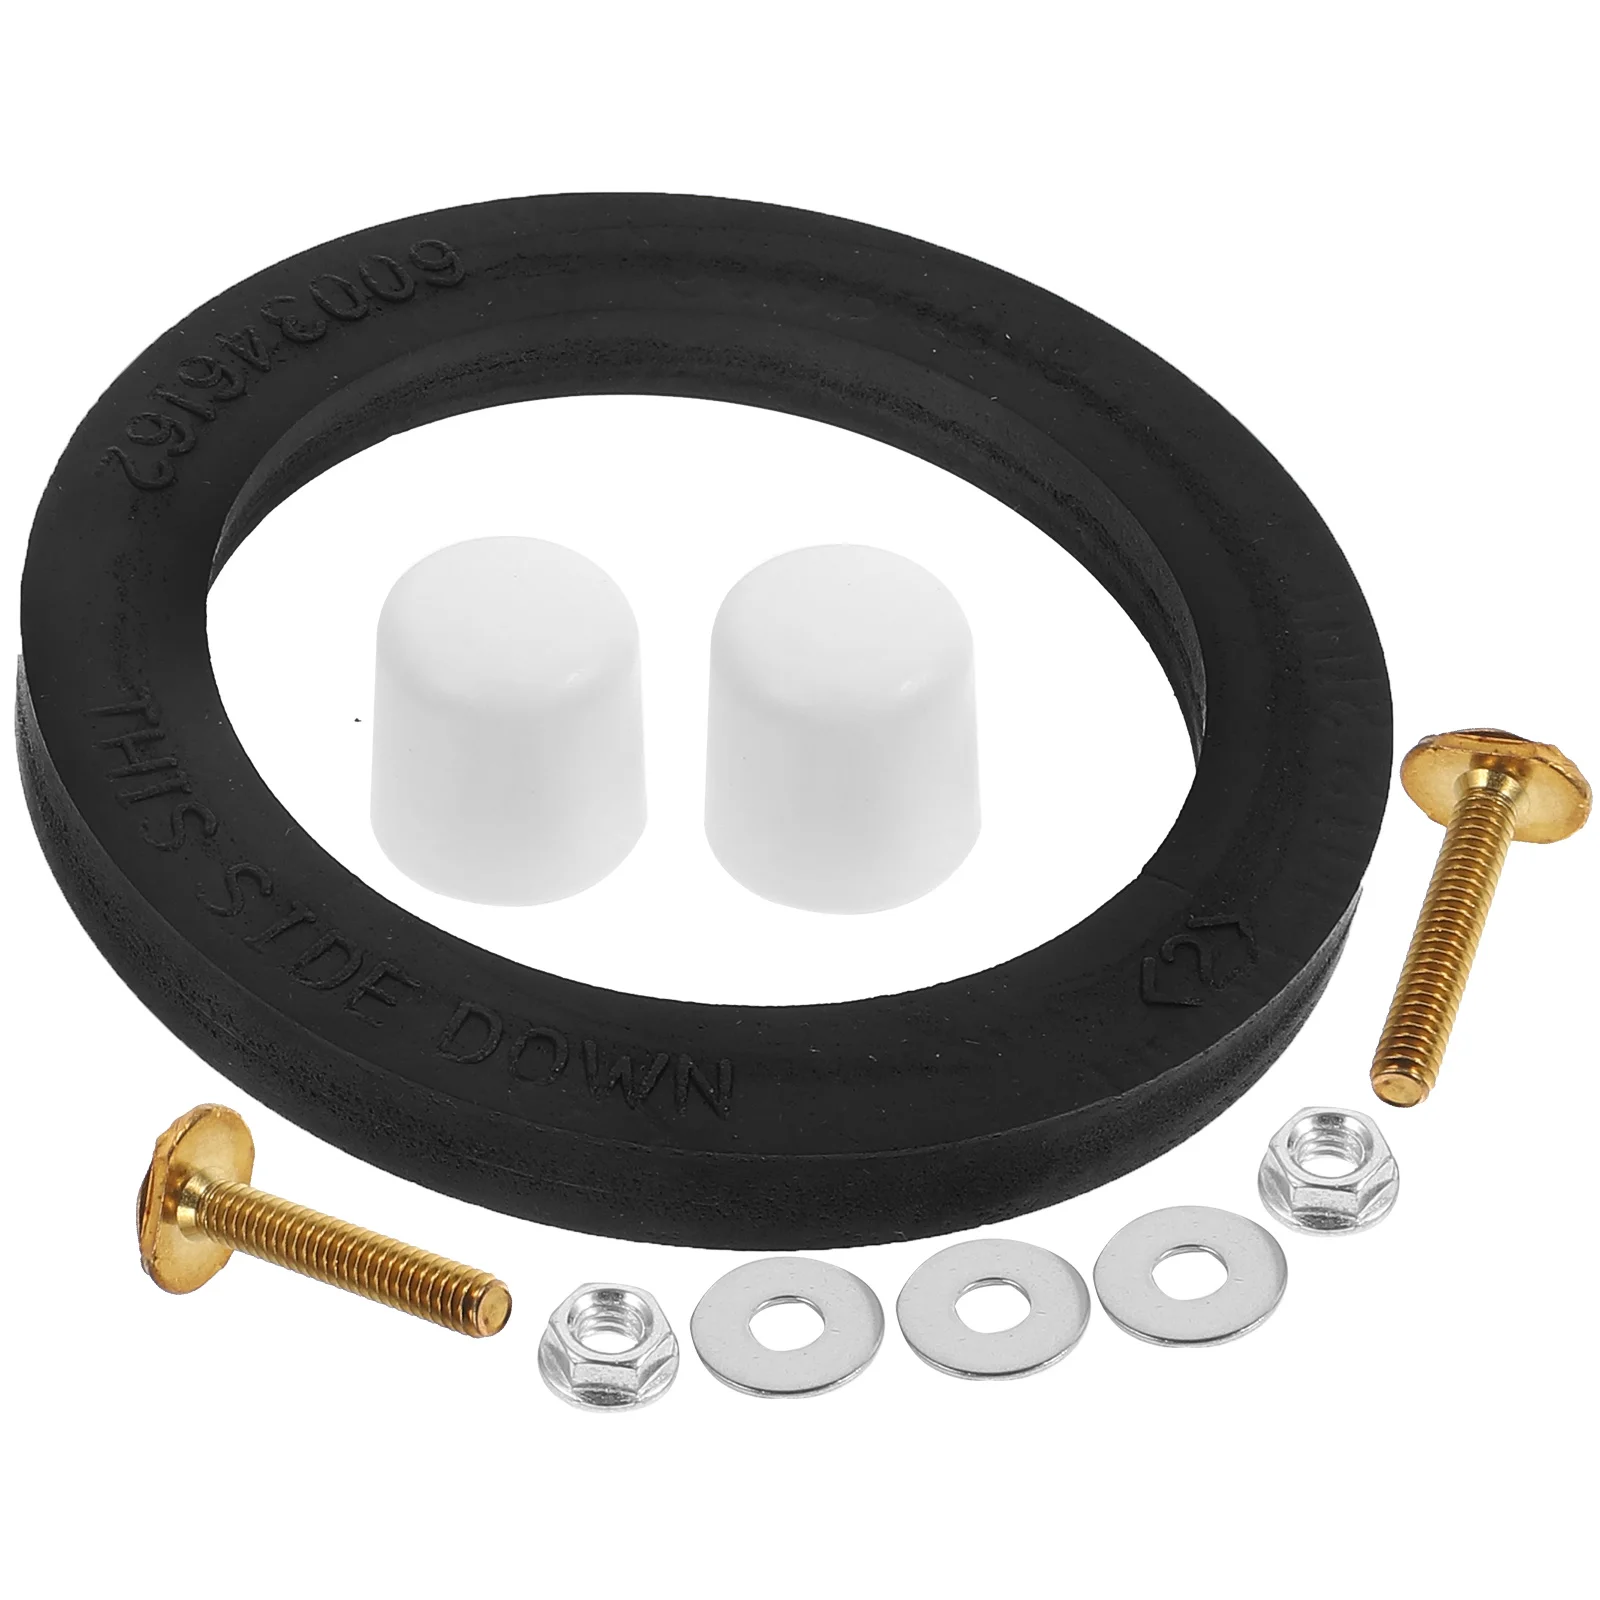 

Rv Toilet Seal Flange Valve Wax Ring Accessories Closet for Toilets Sealing Rubber Gasket Replacement Repair Kit Parts